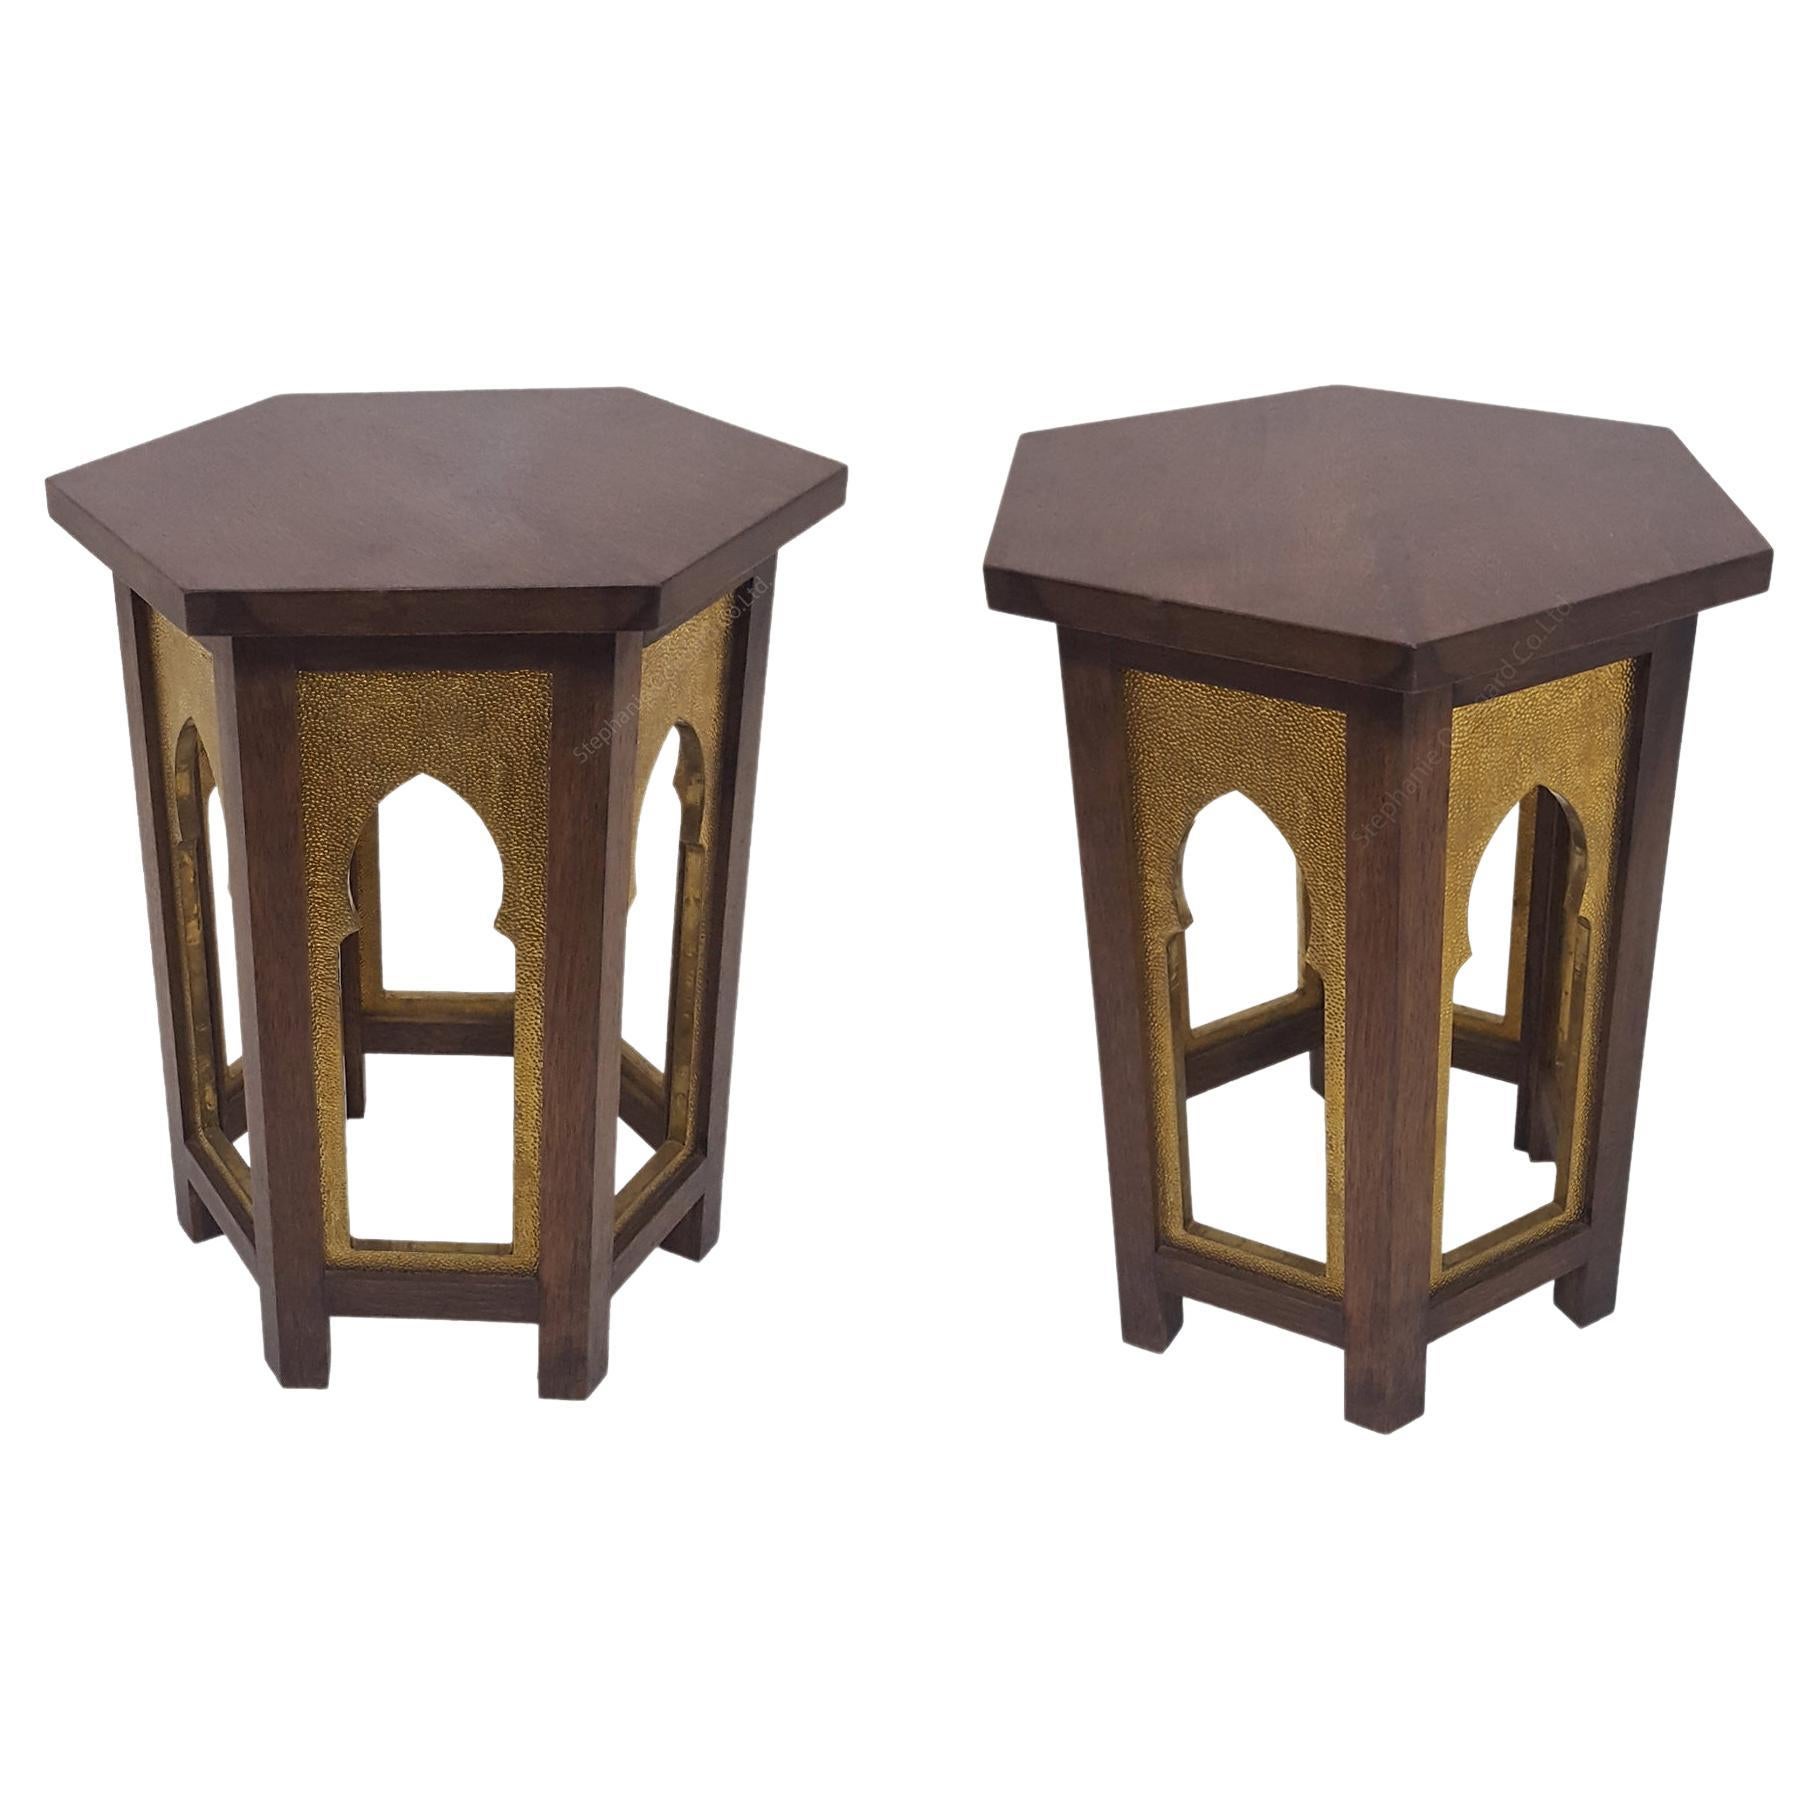 Set of Two Mehrab Tables in Brass Clad over Wood Handcrafted in India For Sale